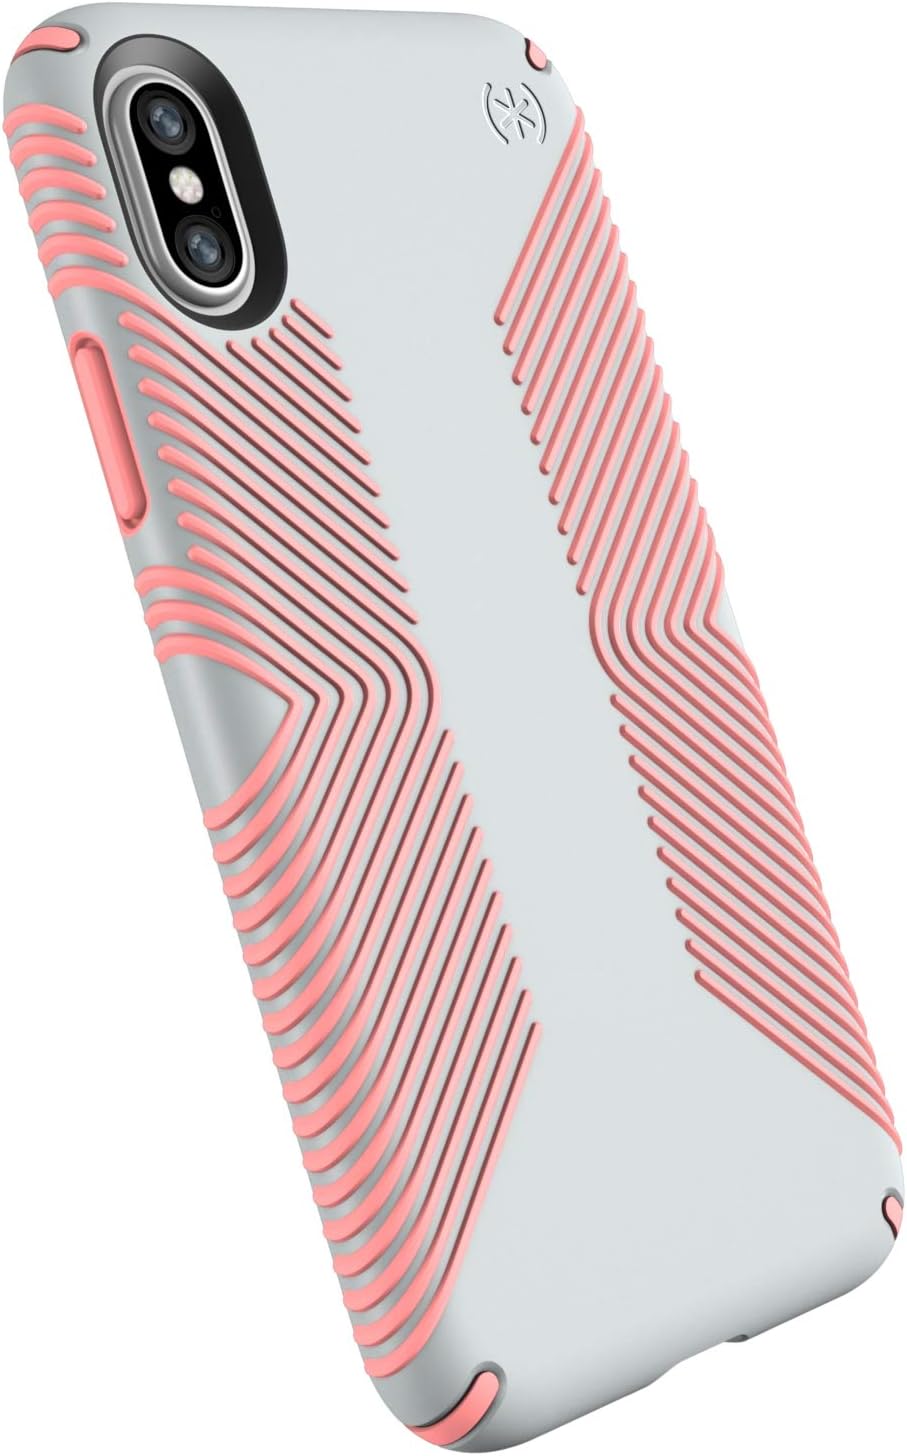 Speck Presidio Grip for Apple iPhone Xs iPhone X Case, 10ft Drop Tested - Grey/Pink